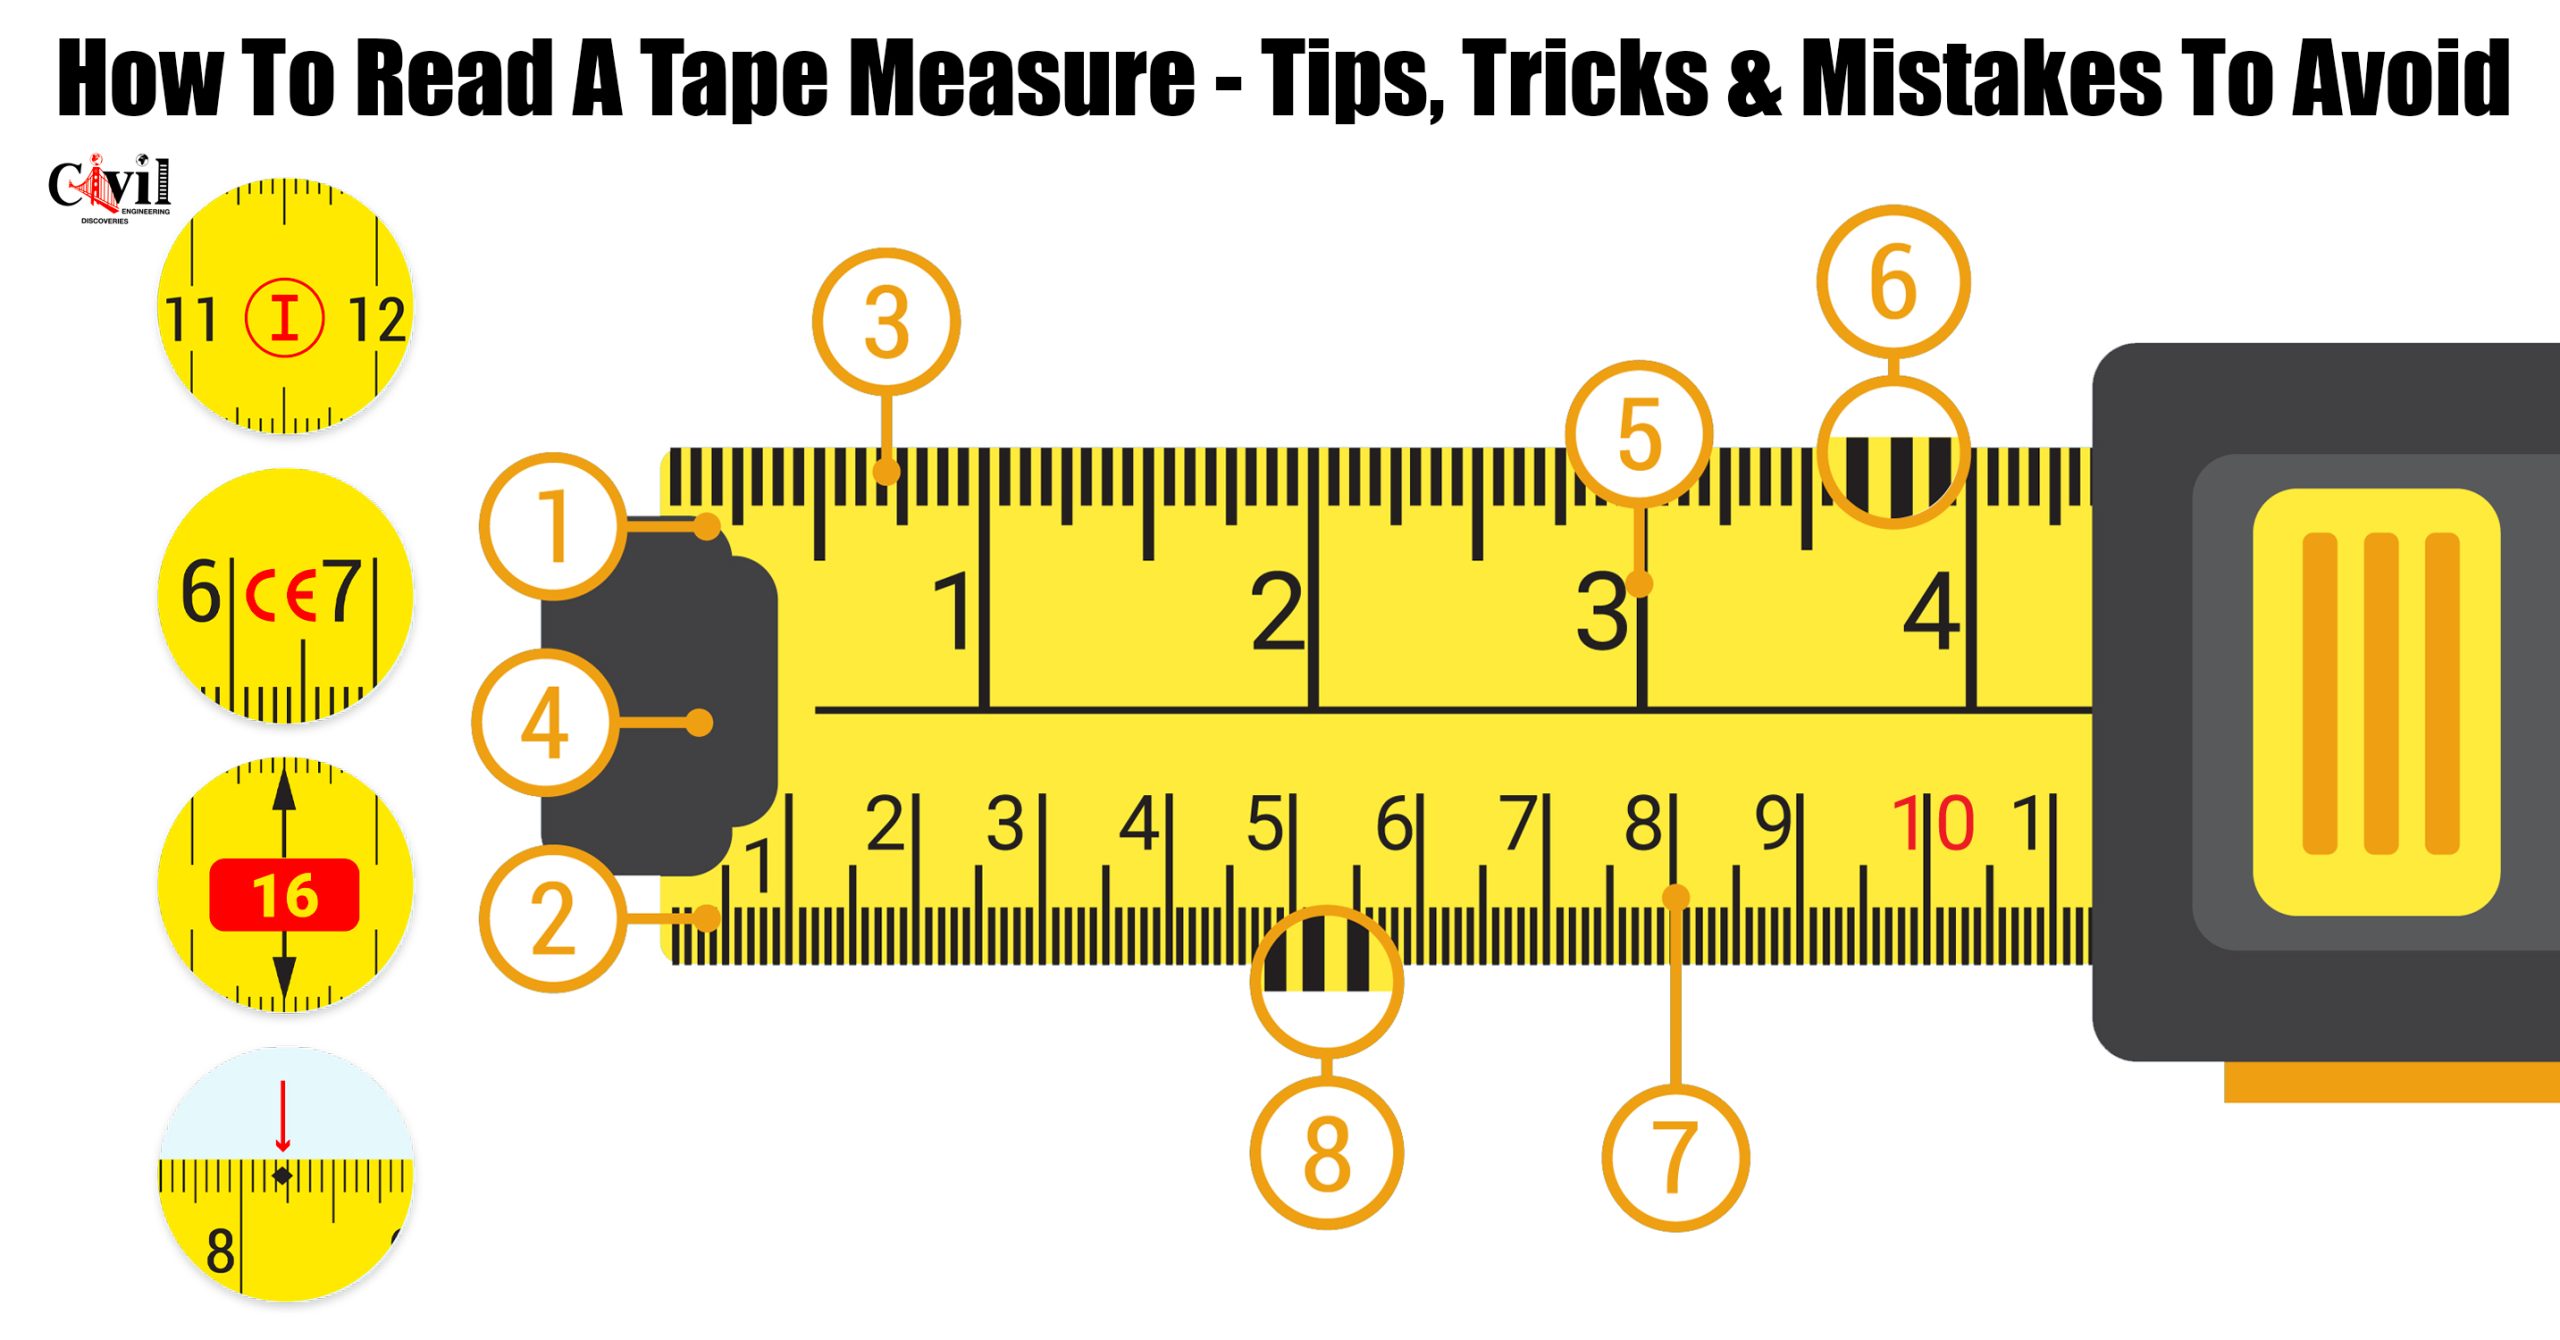 How to Read a Measuring Tape in Meters (Even if You Hate Math)